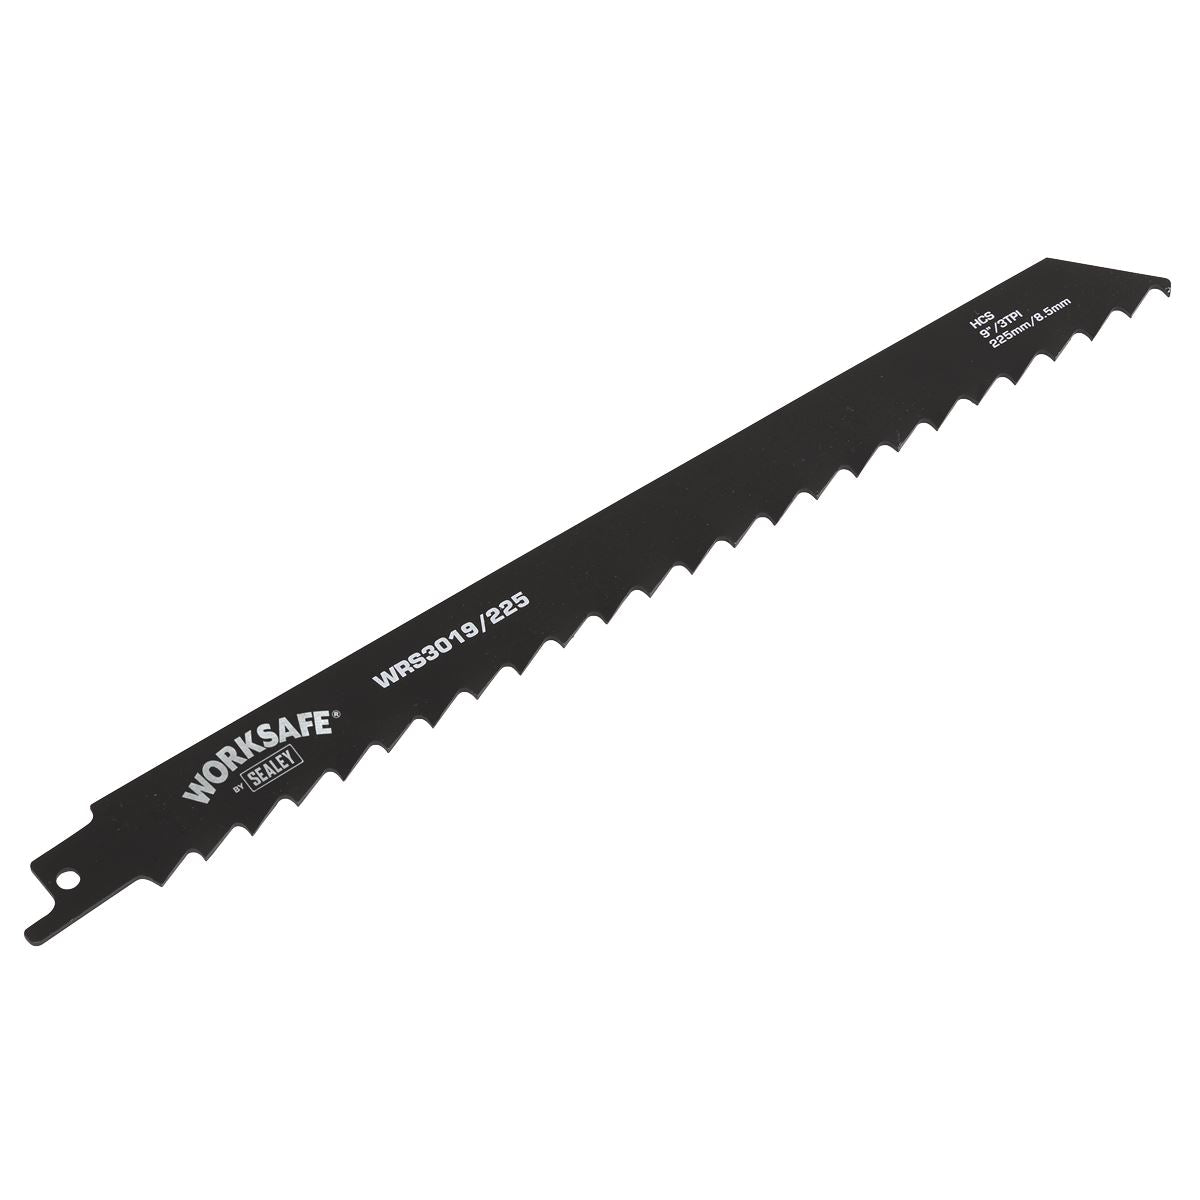 Sealey Reciprocating Saw Blade Wood 225mm 3tpi - Pack of 5